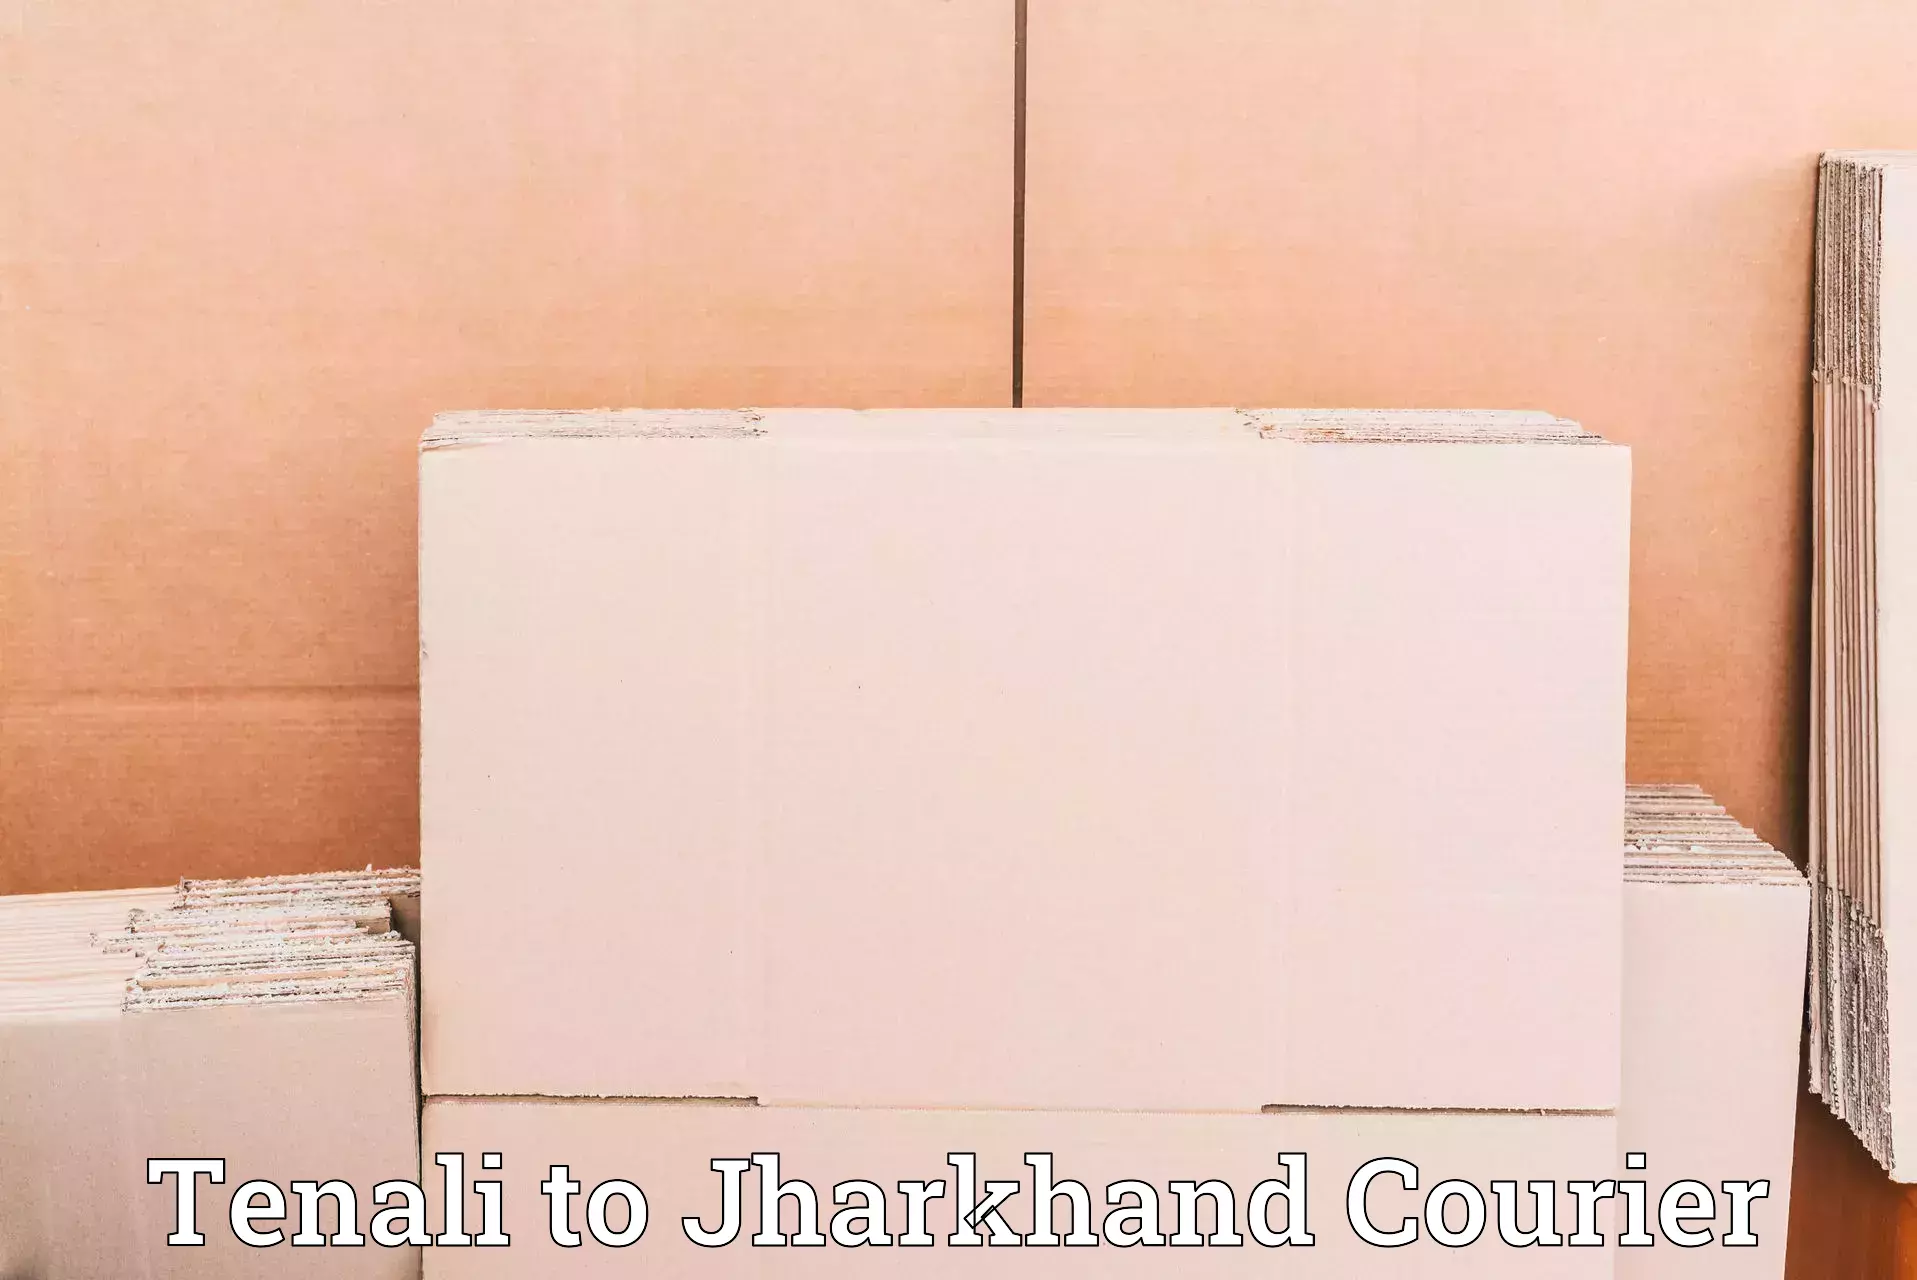 State-of-the-art courier technology Tenali to Barki Saria